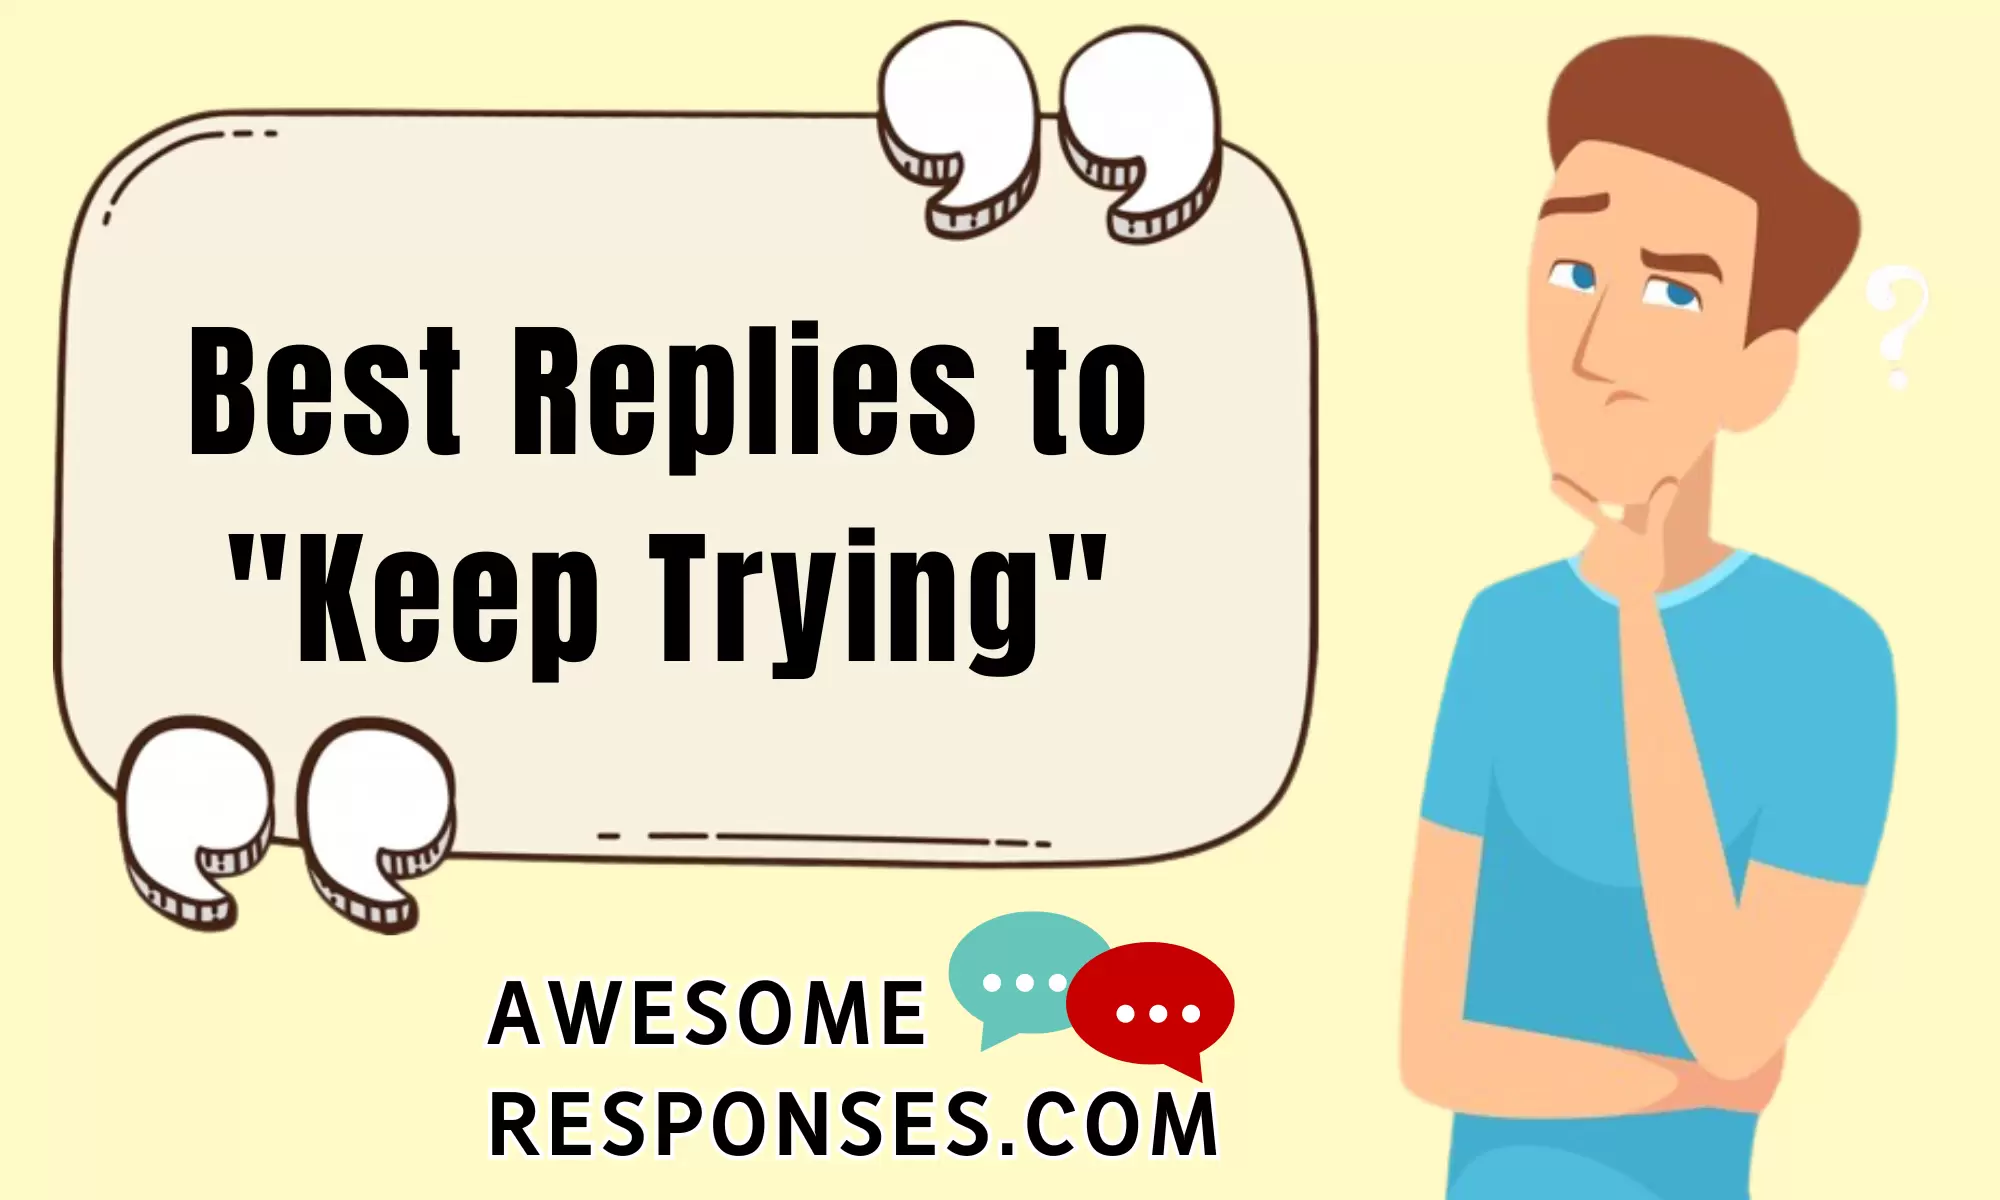 Best Replies to "Keep Trying"